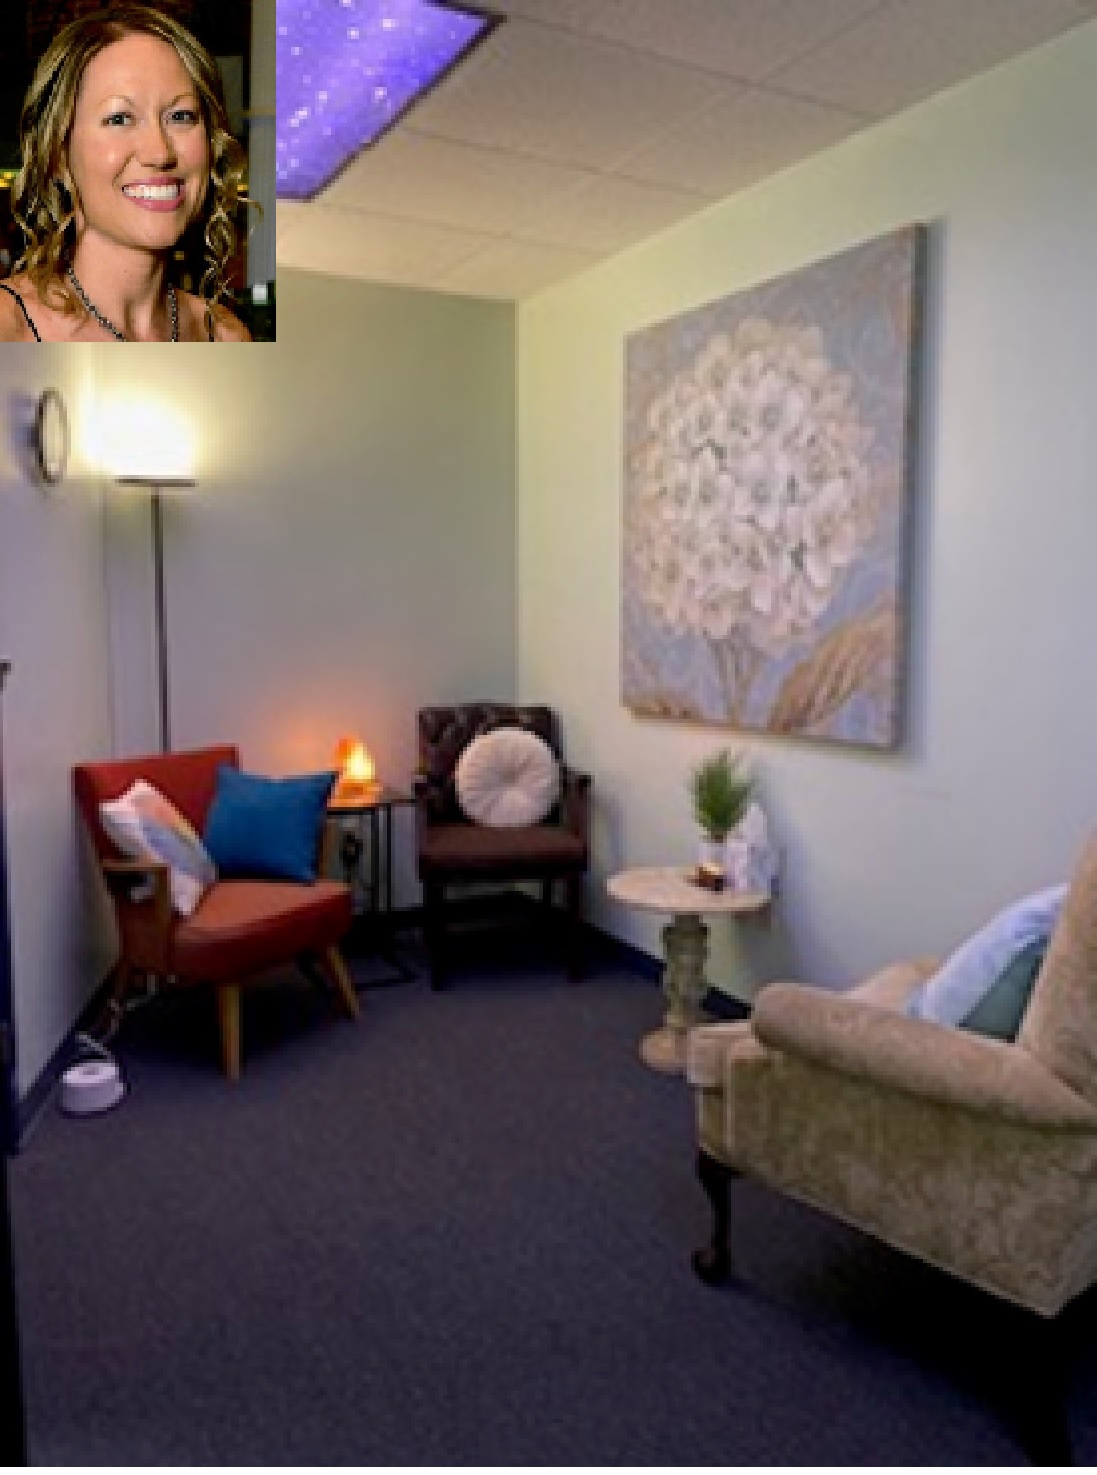  Lindsey Spotts and her office interior.